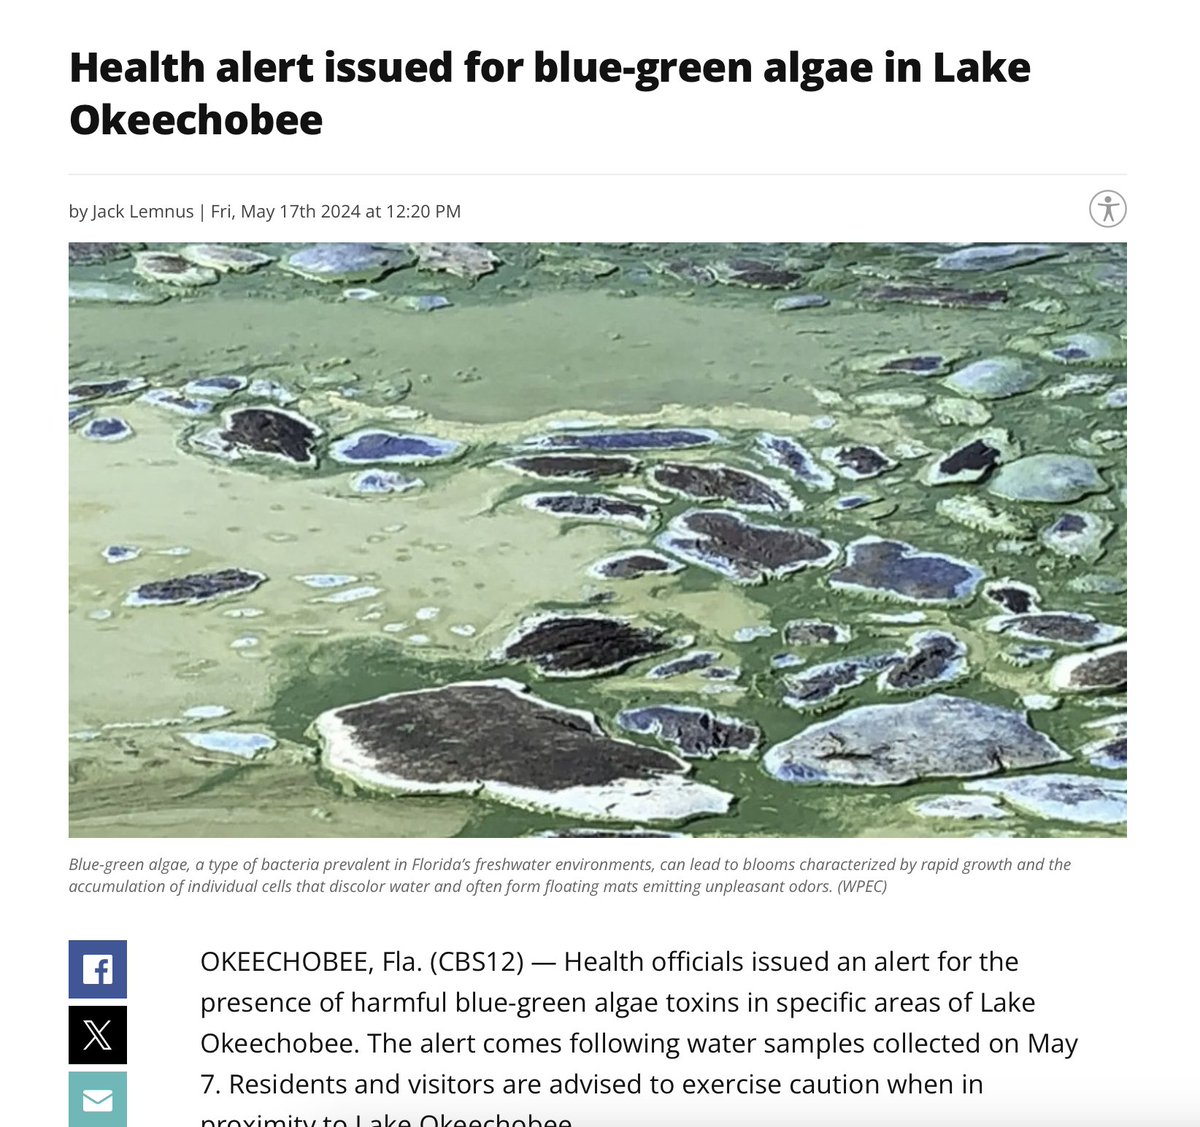 🚨HEALTH ALERT🚨Toxic blue-green algae is confirmed in Lake Okeechobee. This is a public health threat to our pets, children, and the broader community. I’ll keep fighting for zero discharges.